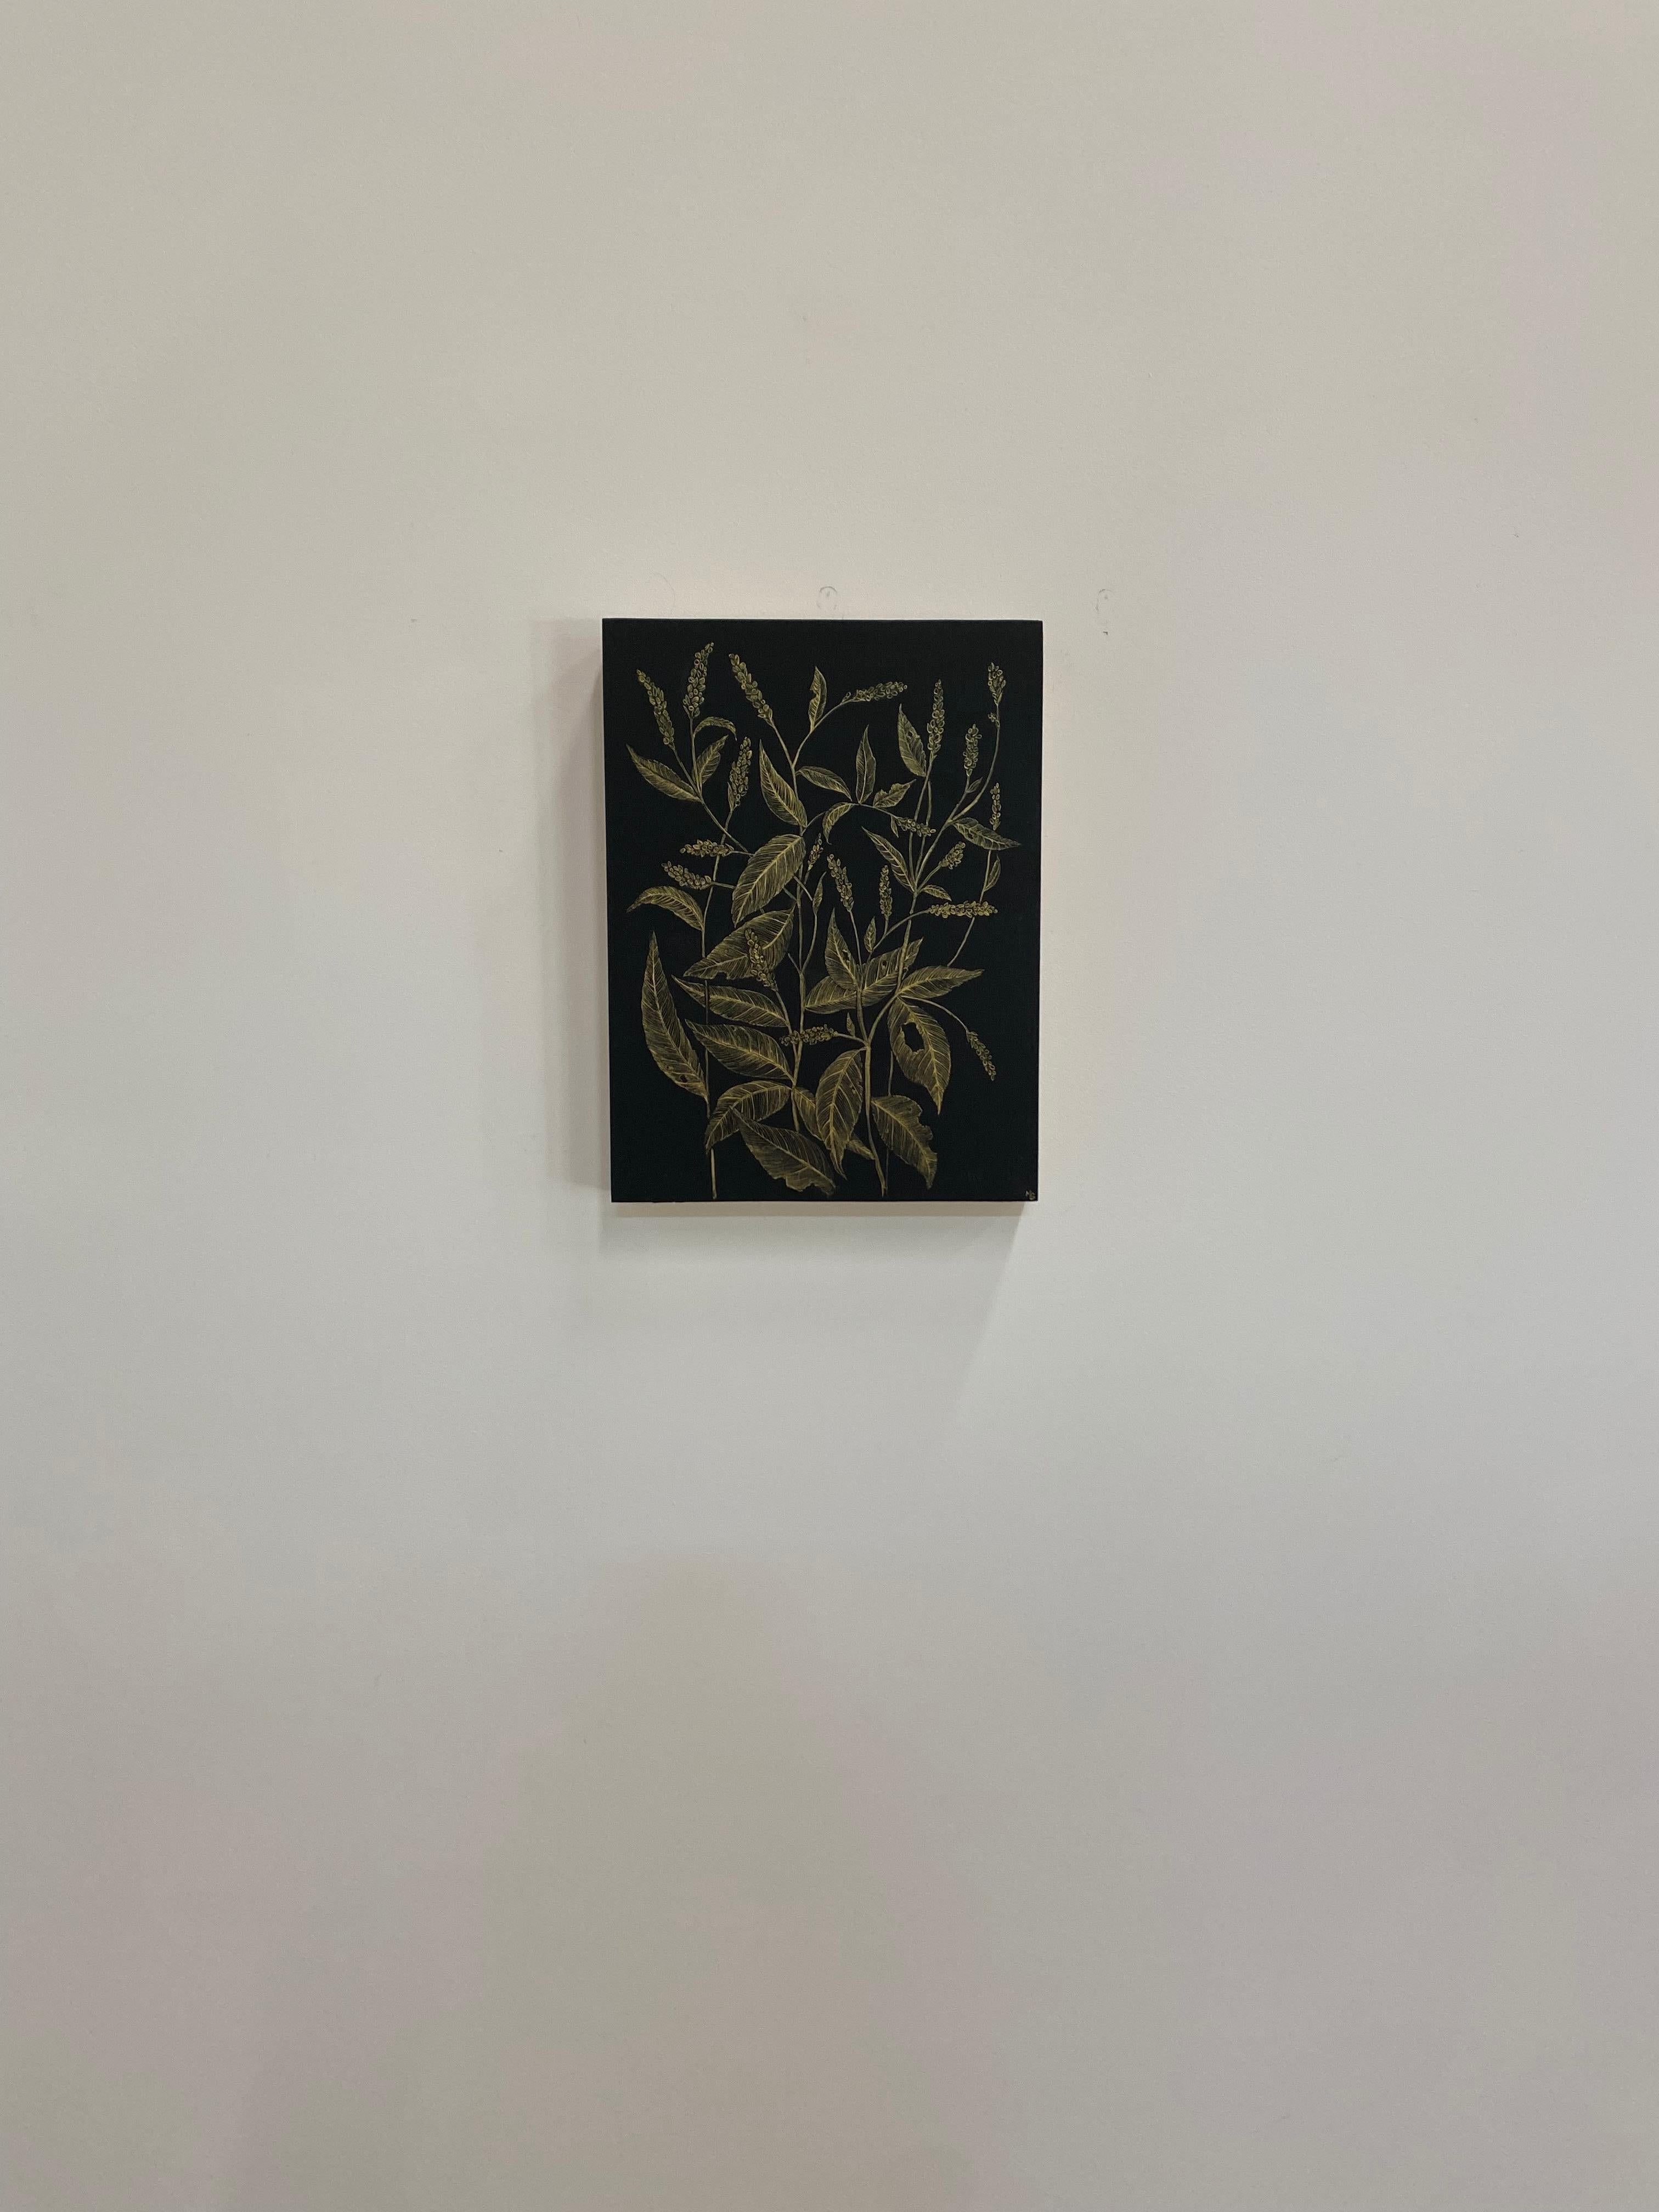 Delicate botanical study in metallic gold acrylic on cradled panel, painted black. The exploration of ephemerality, and the fragility of a wild Lady's Thumb, its leaves and buds are the focus of this painting by Margot Glass. The exquisite beauty of